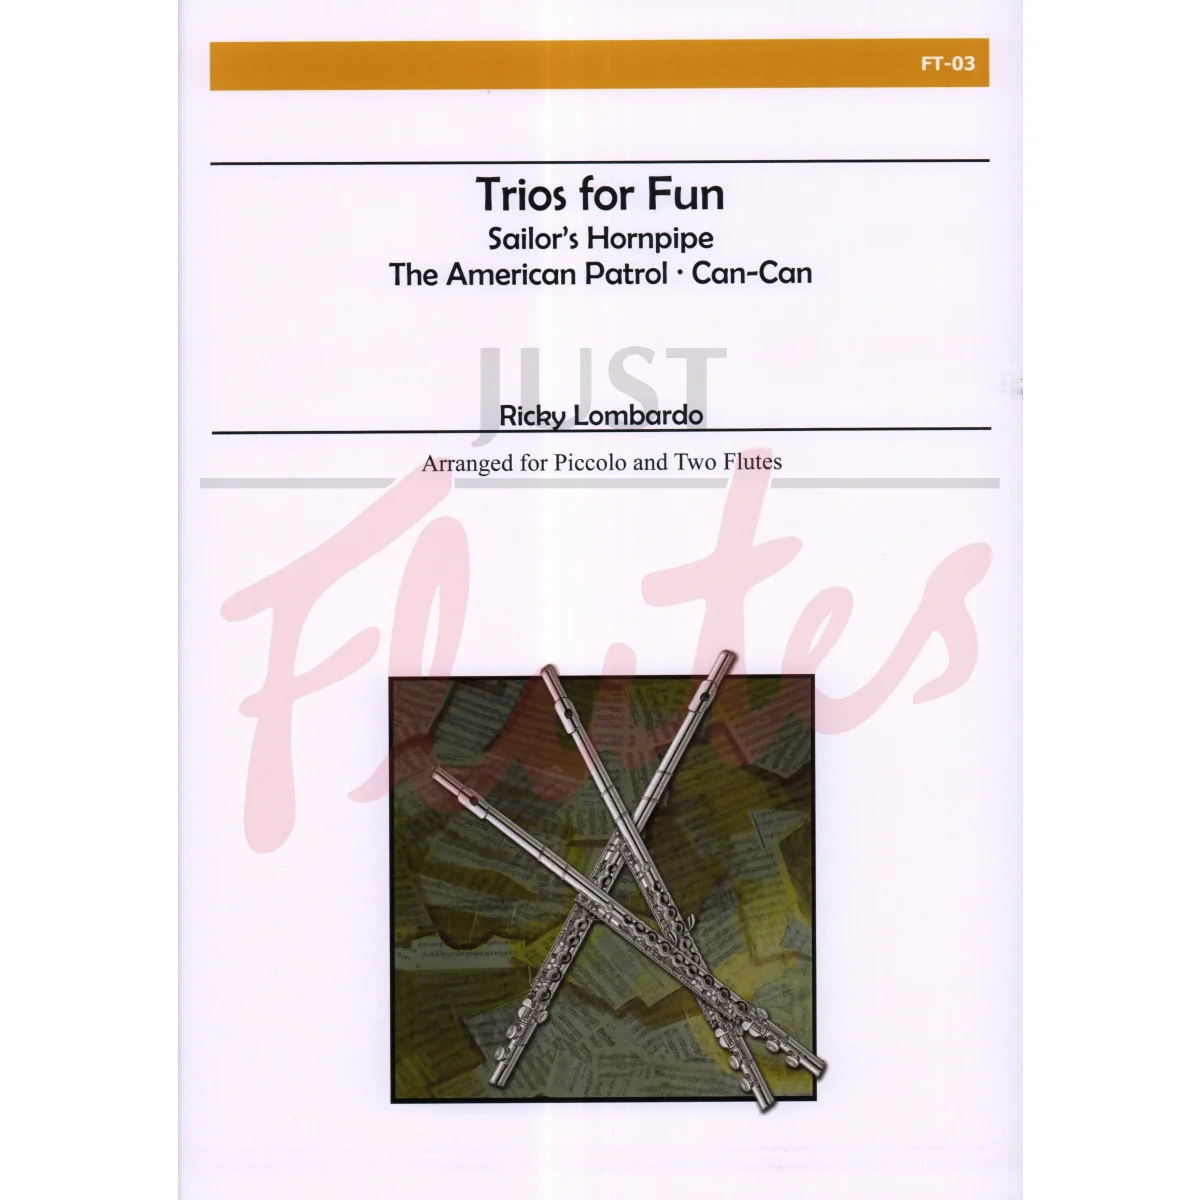 Trios for Fun arranged for Piccolo and Two Flutes